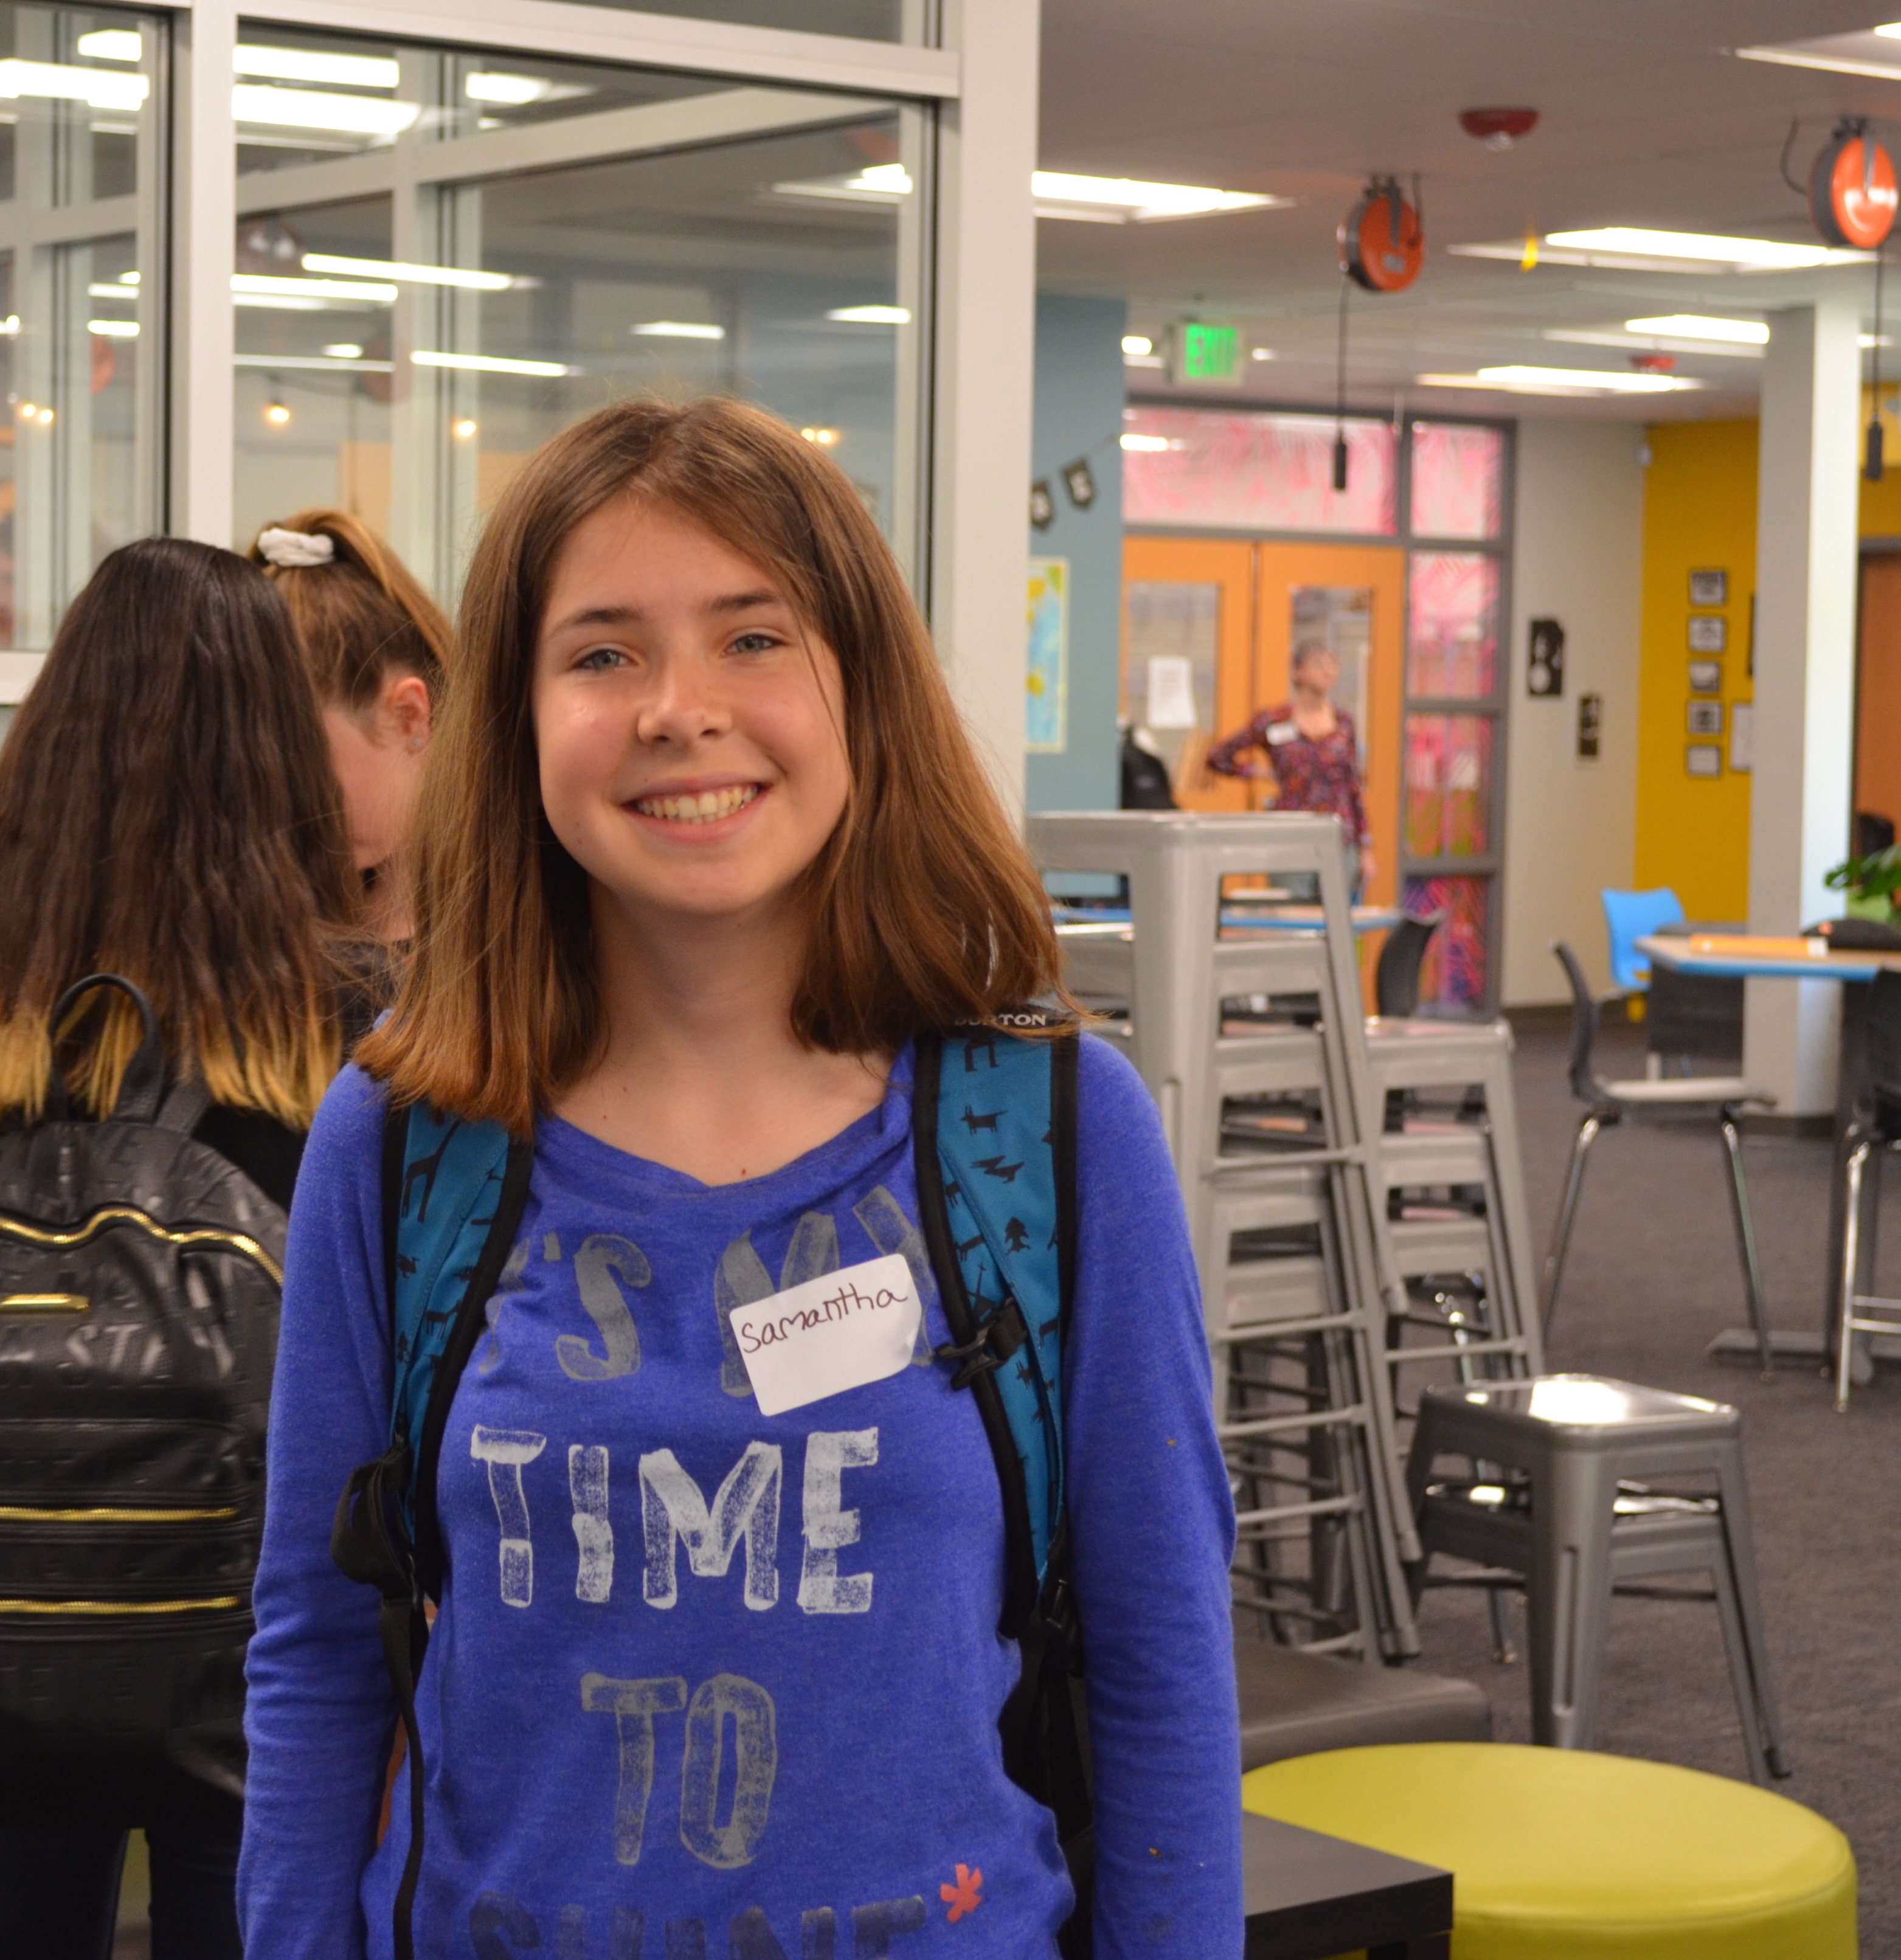 A student smiles for the camera while wearing a blue sweatshirt that reads "It's My Time to Shine."